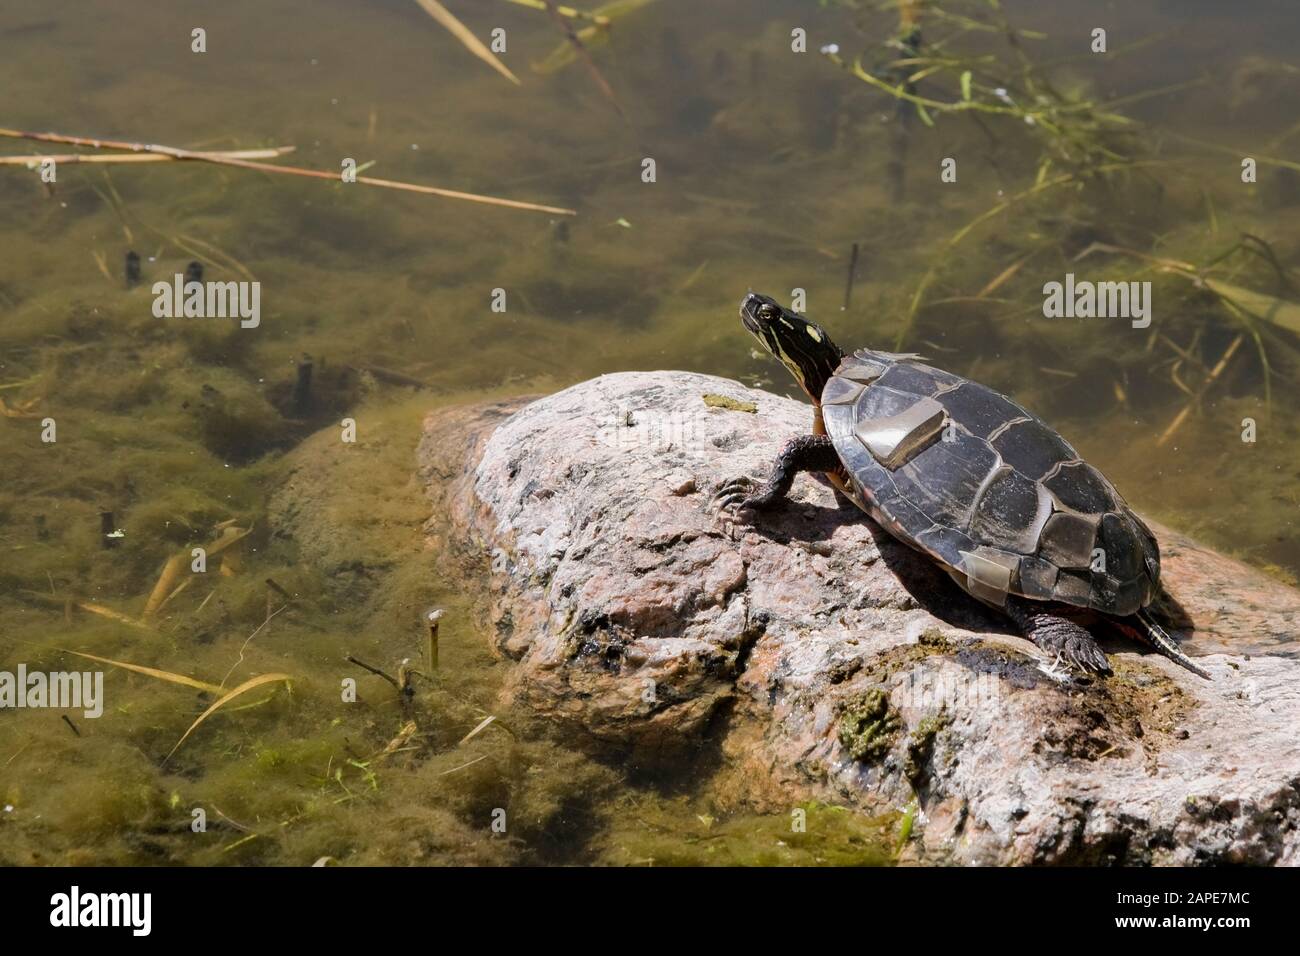 Chrysemys picta - Painted turtle with molting shell basking in the sun on a exposed rock in pond overgrown with green Chlorophyta - Algae in summer. Stock Photo